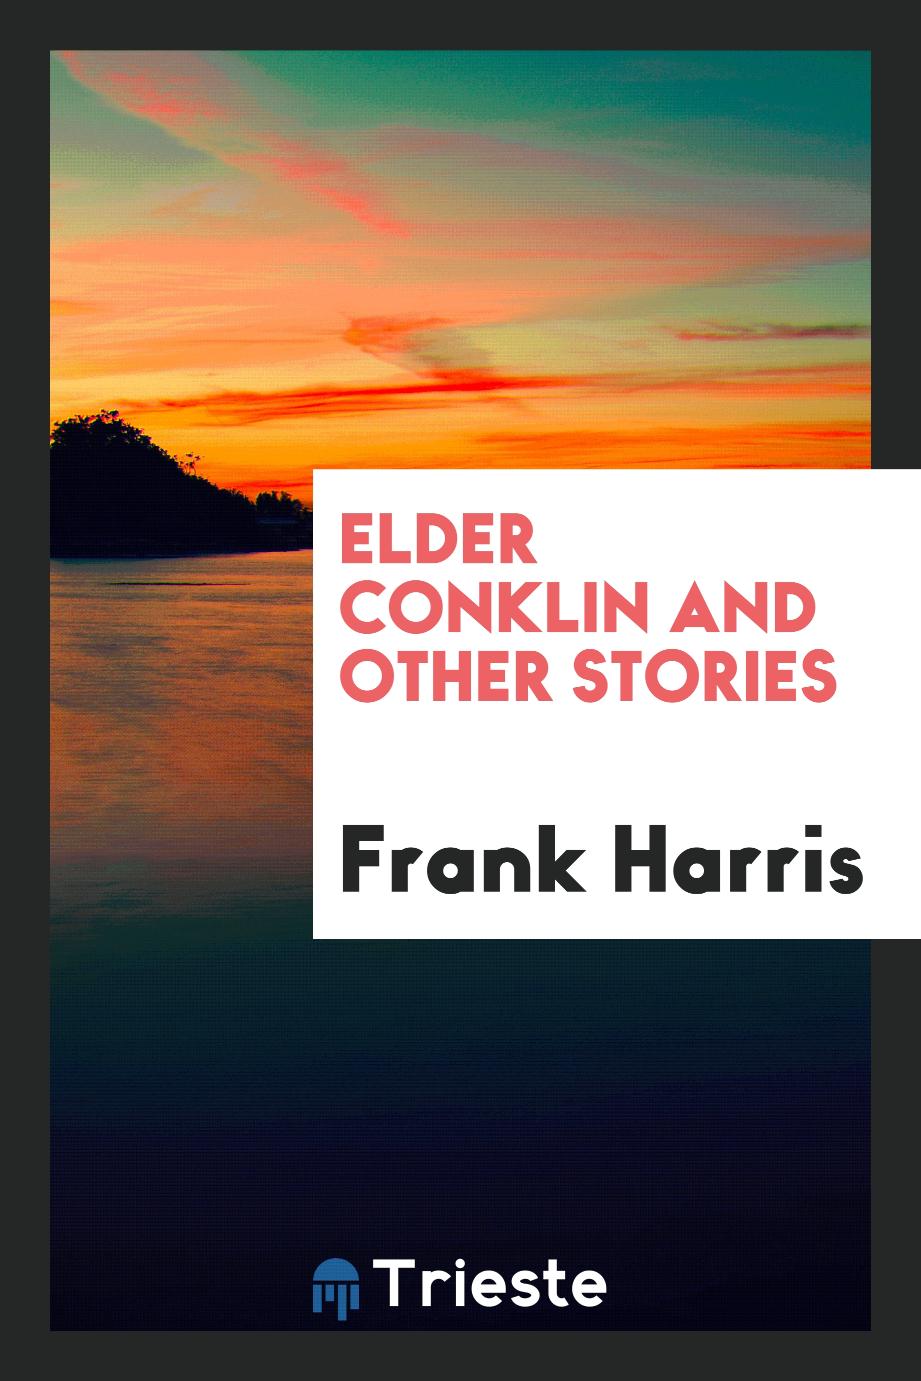 Elder Conklin and other stories